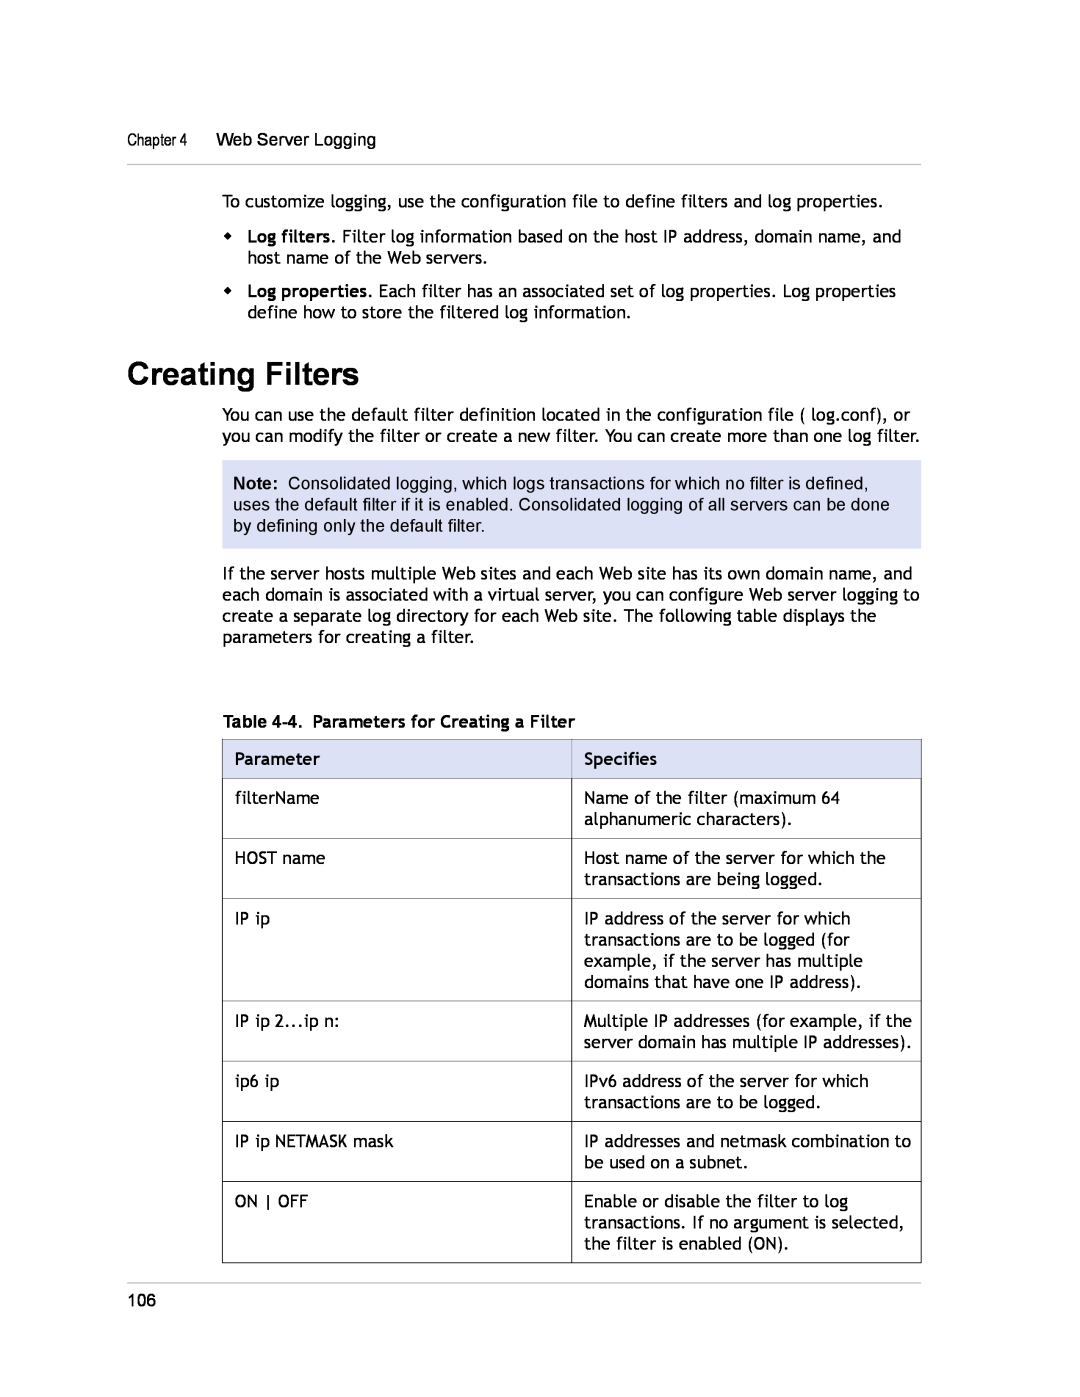 Citrix Systems CITRIX NETSCALER 9.3 manual 4. Parameters for Creating a Filter, Creating Filters, Specifies 